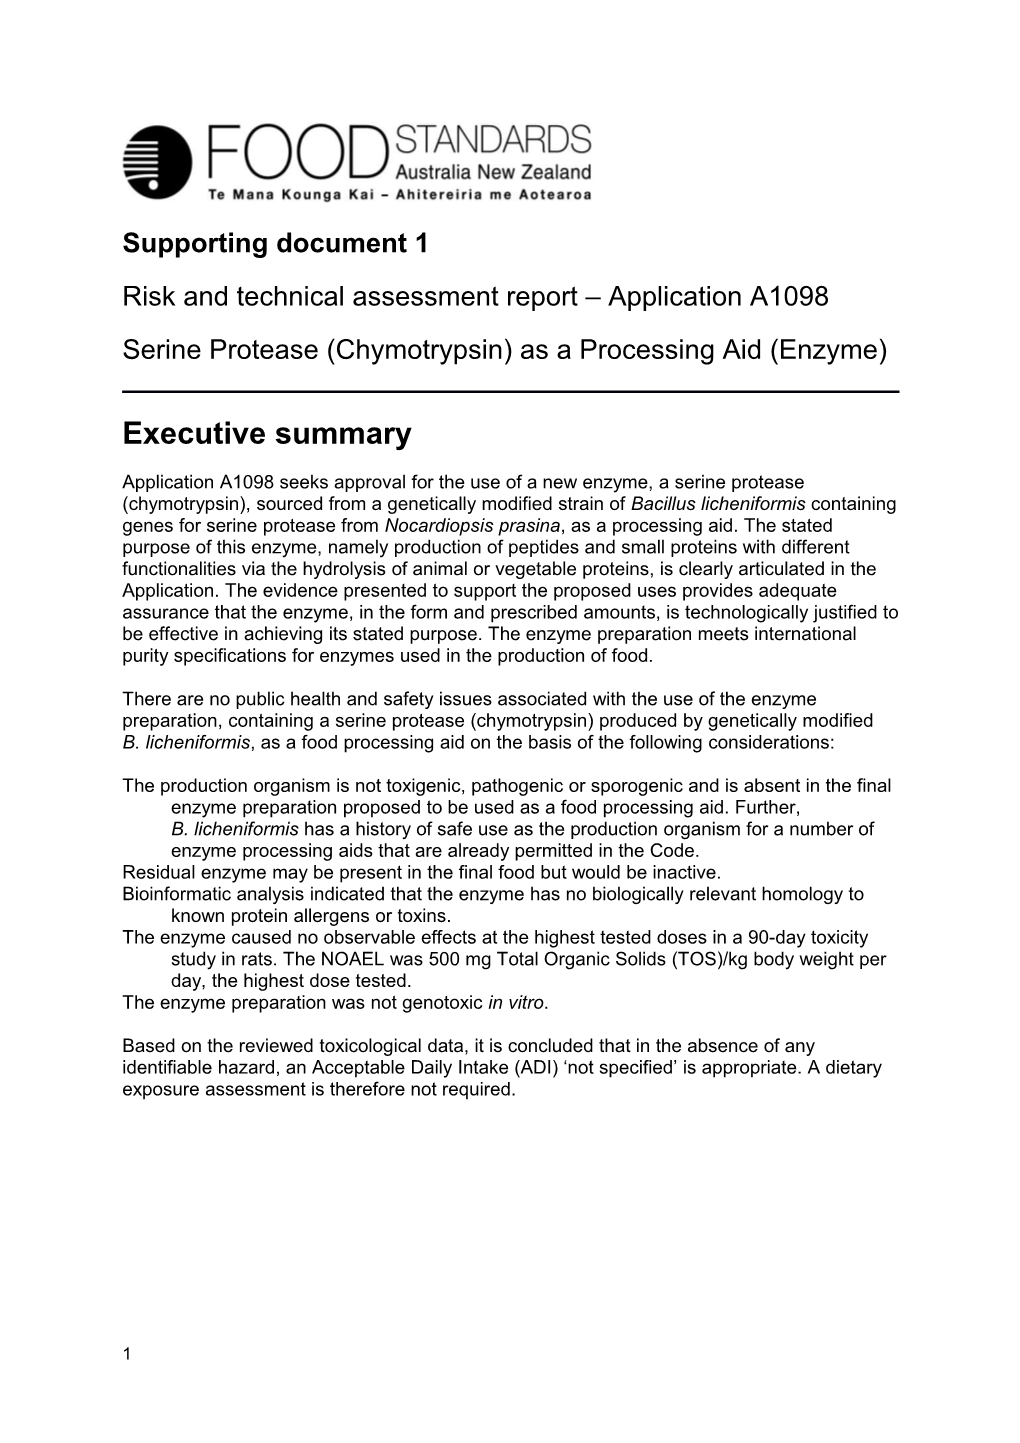 Risk and Technical Assessment Report Application A1098